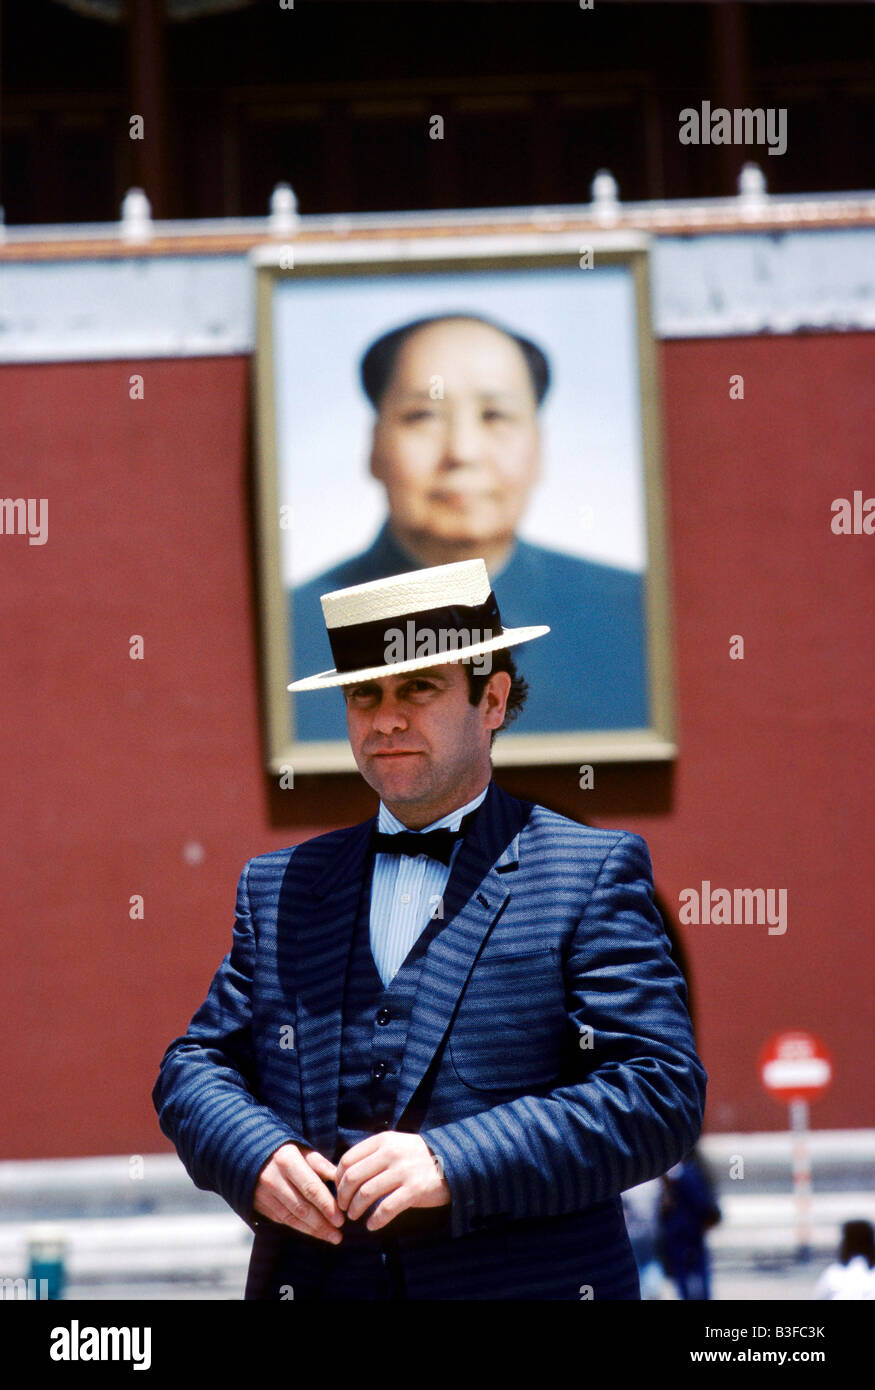 British pop singer Elton John wearing a suit, bowtie and boater in Tiananmen Square, with Mao portrait in background Stock Photo